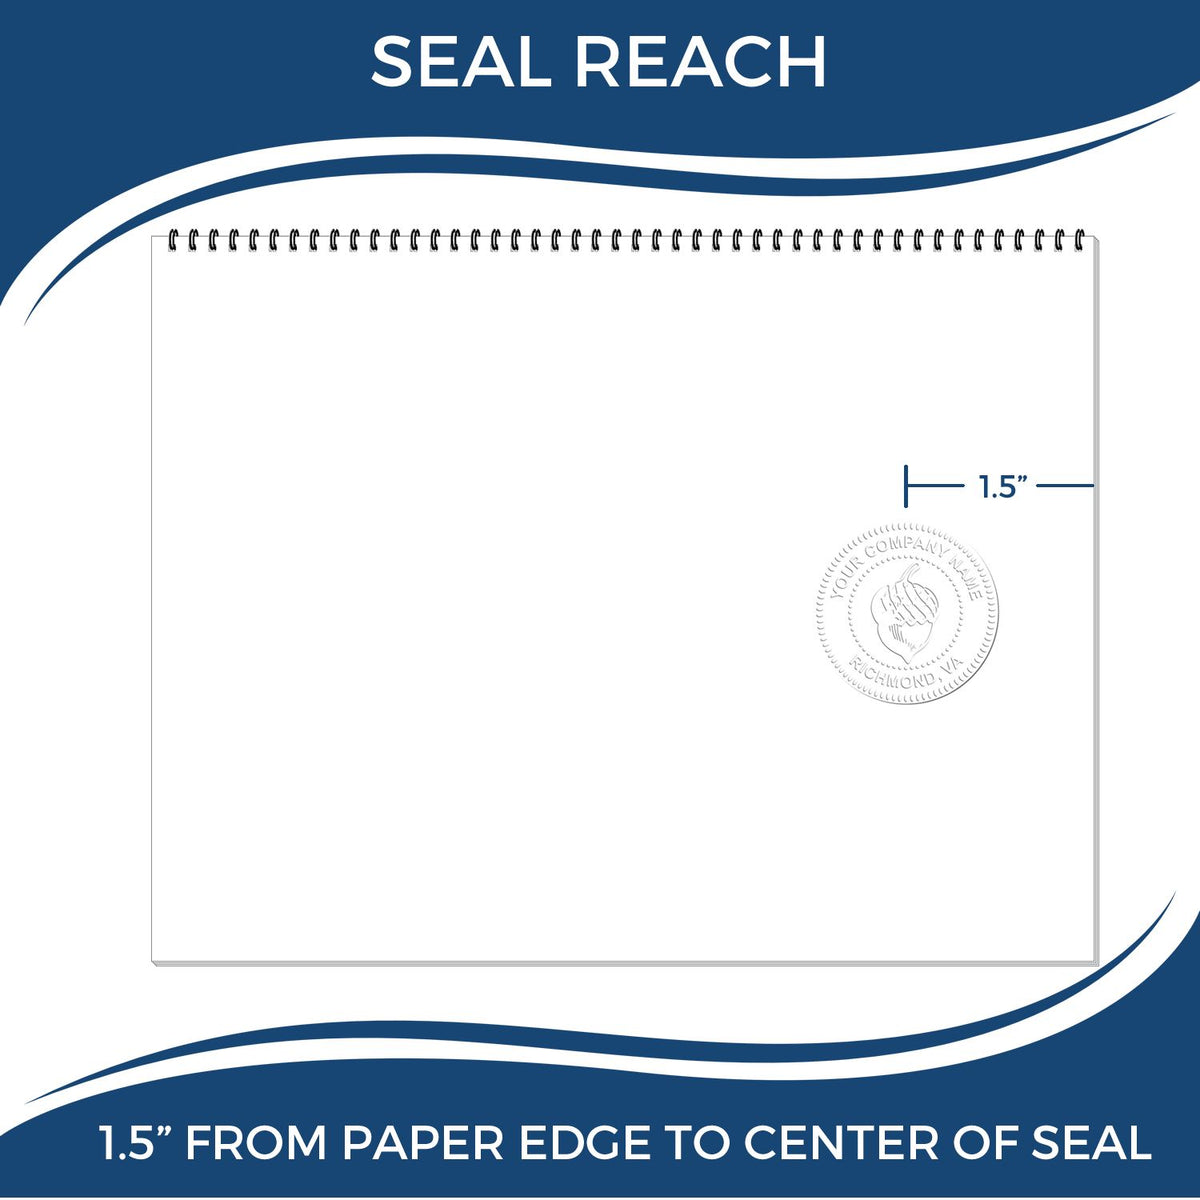 An infographic showing the seal reach which is represented by a ruler and a miniature seal image of the Montana Engineer Desk Seal